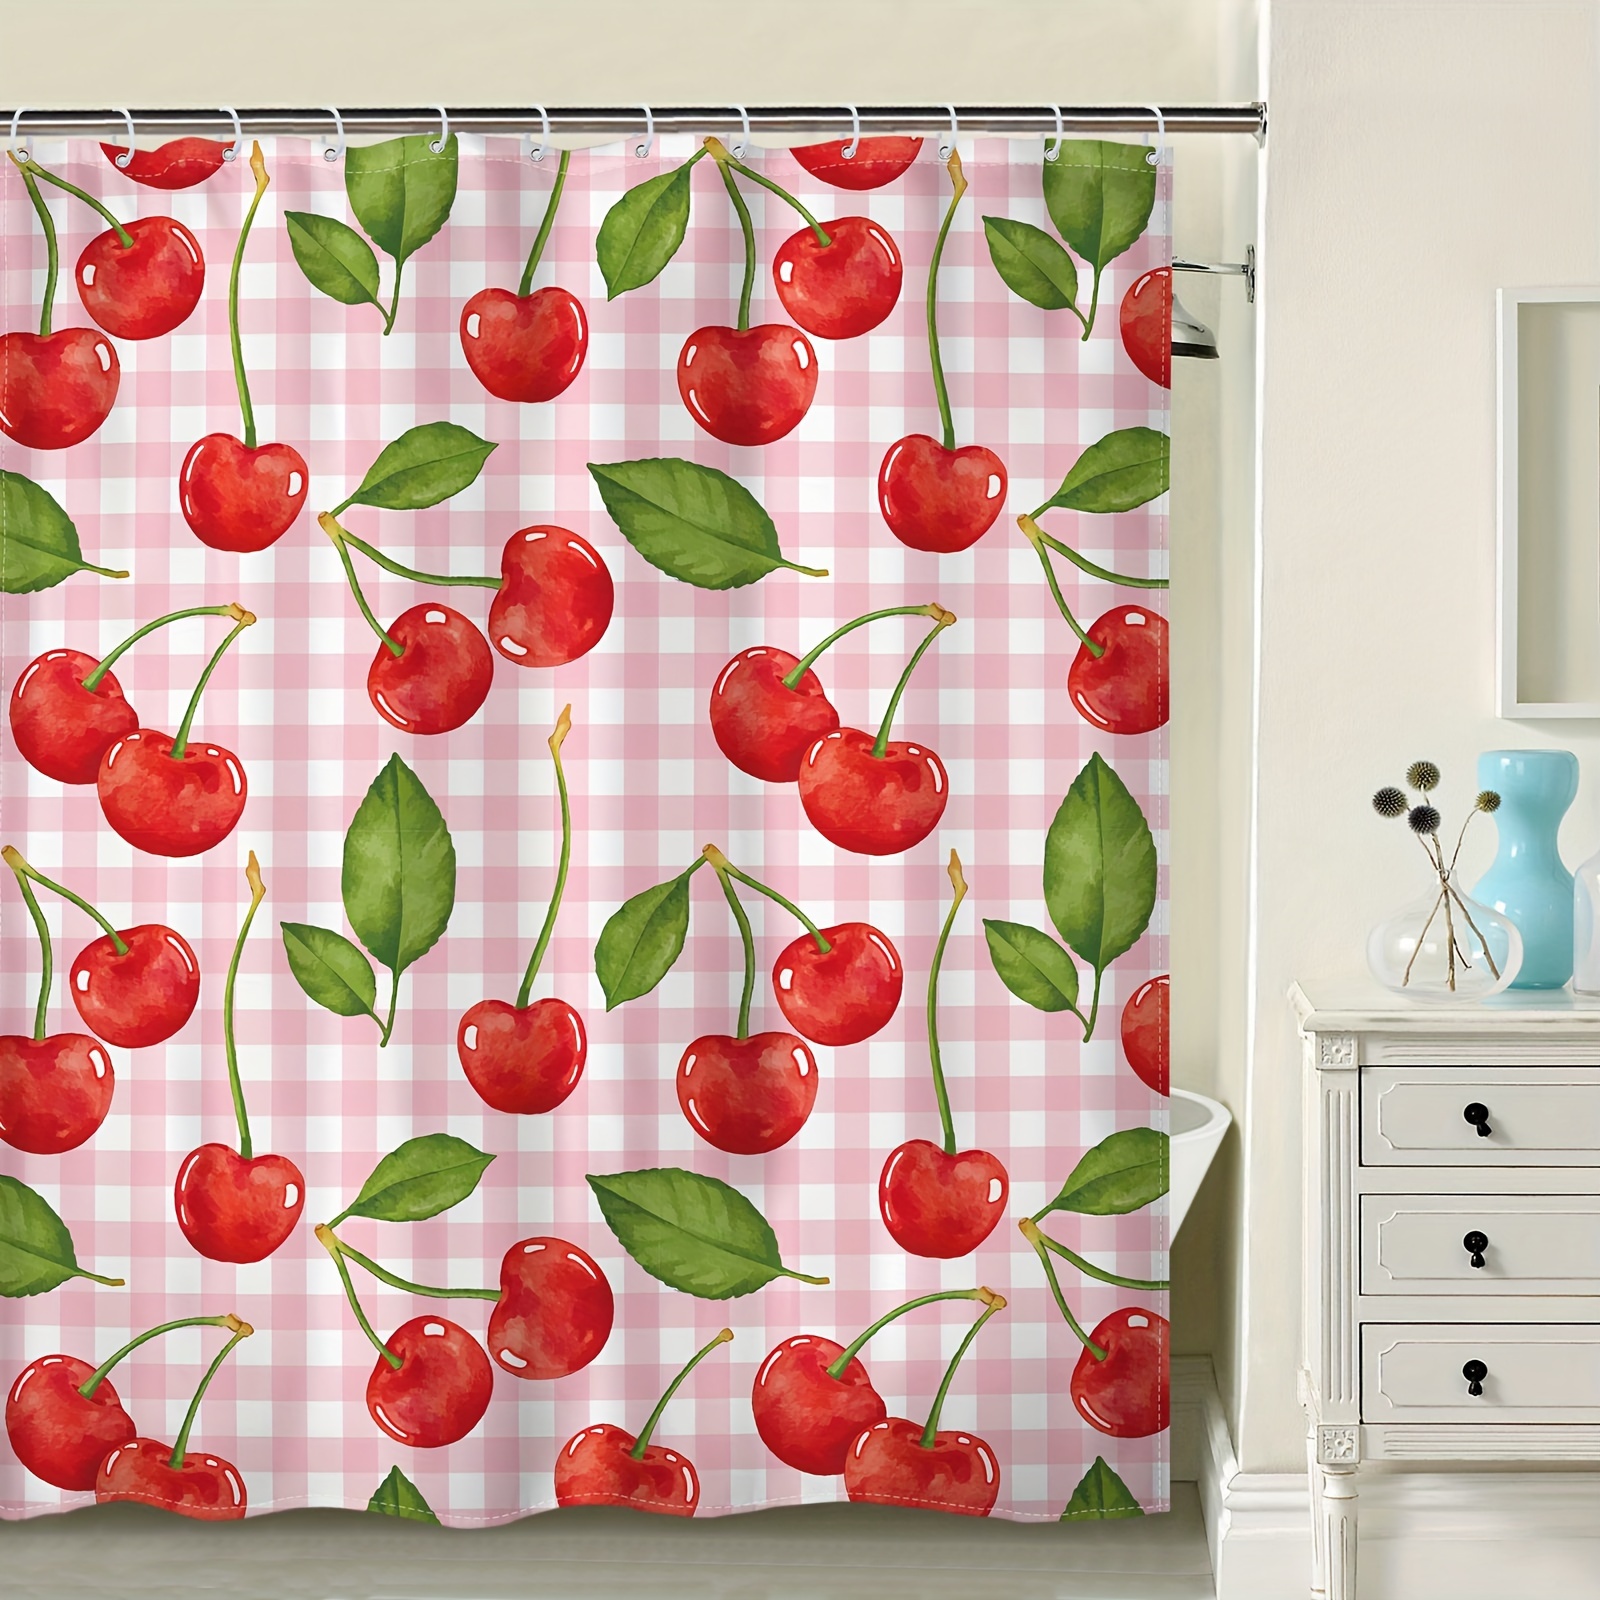 Cute Frogs Shower Curtain Bathroom Decor Waterproof Fabric Shower Curtains  with Hooks 60x72 Inch